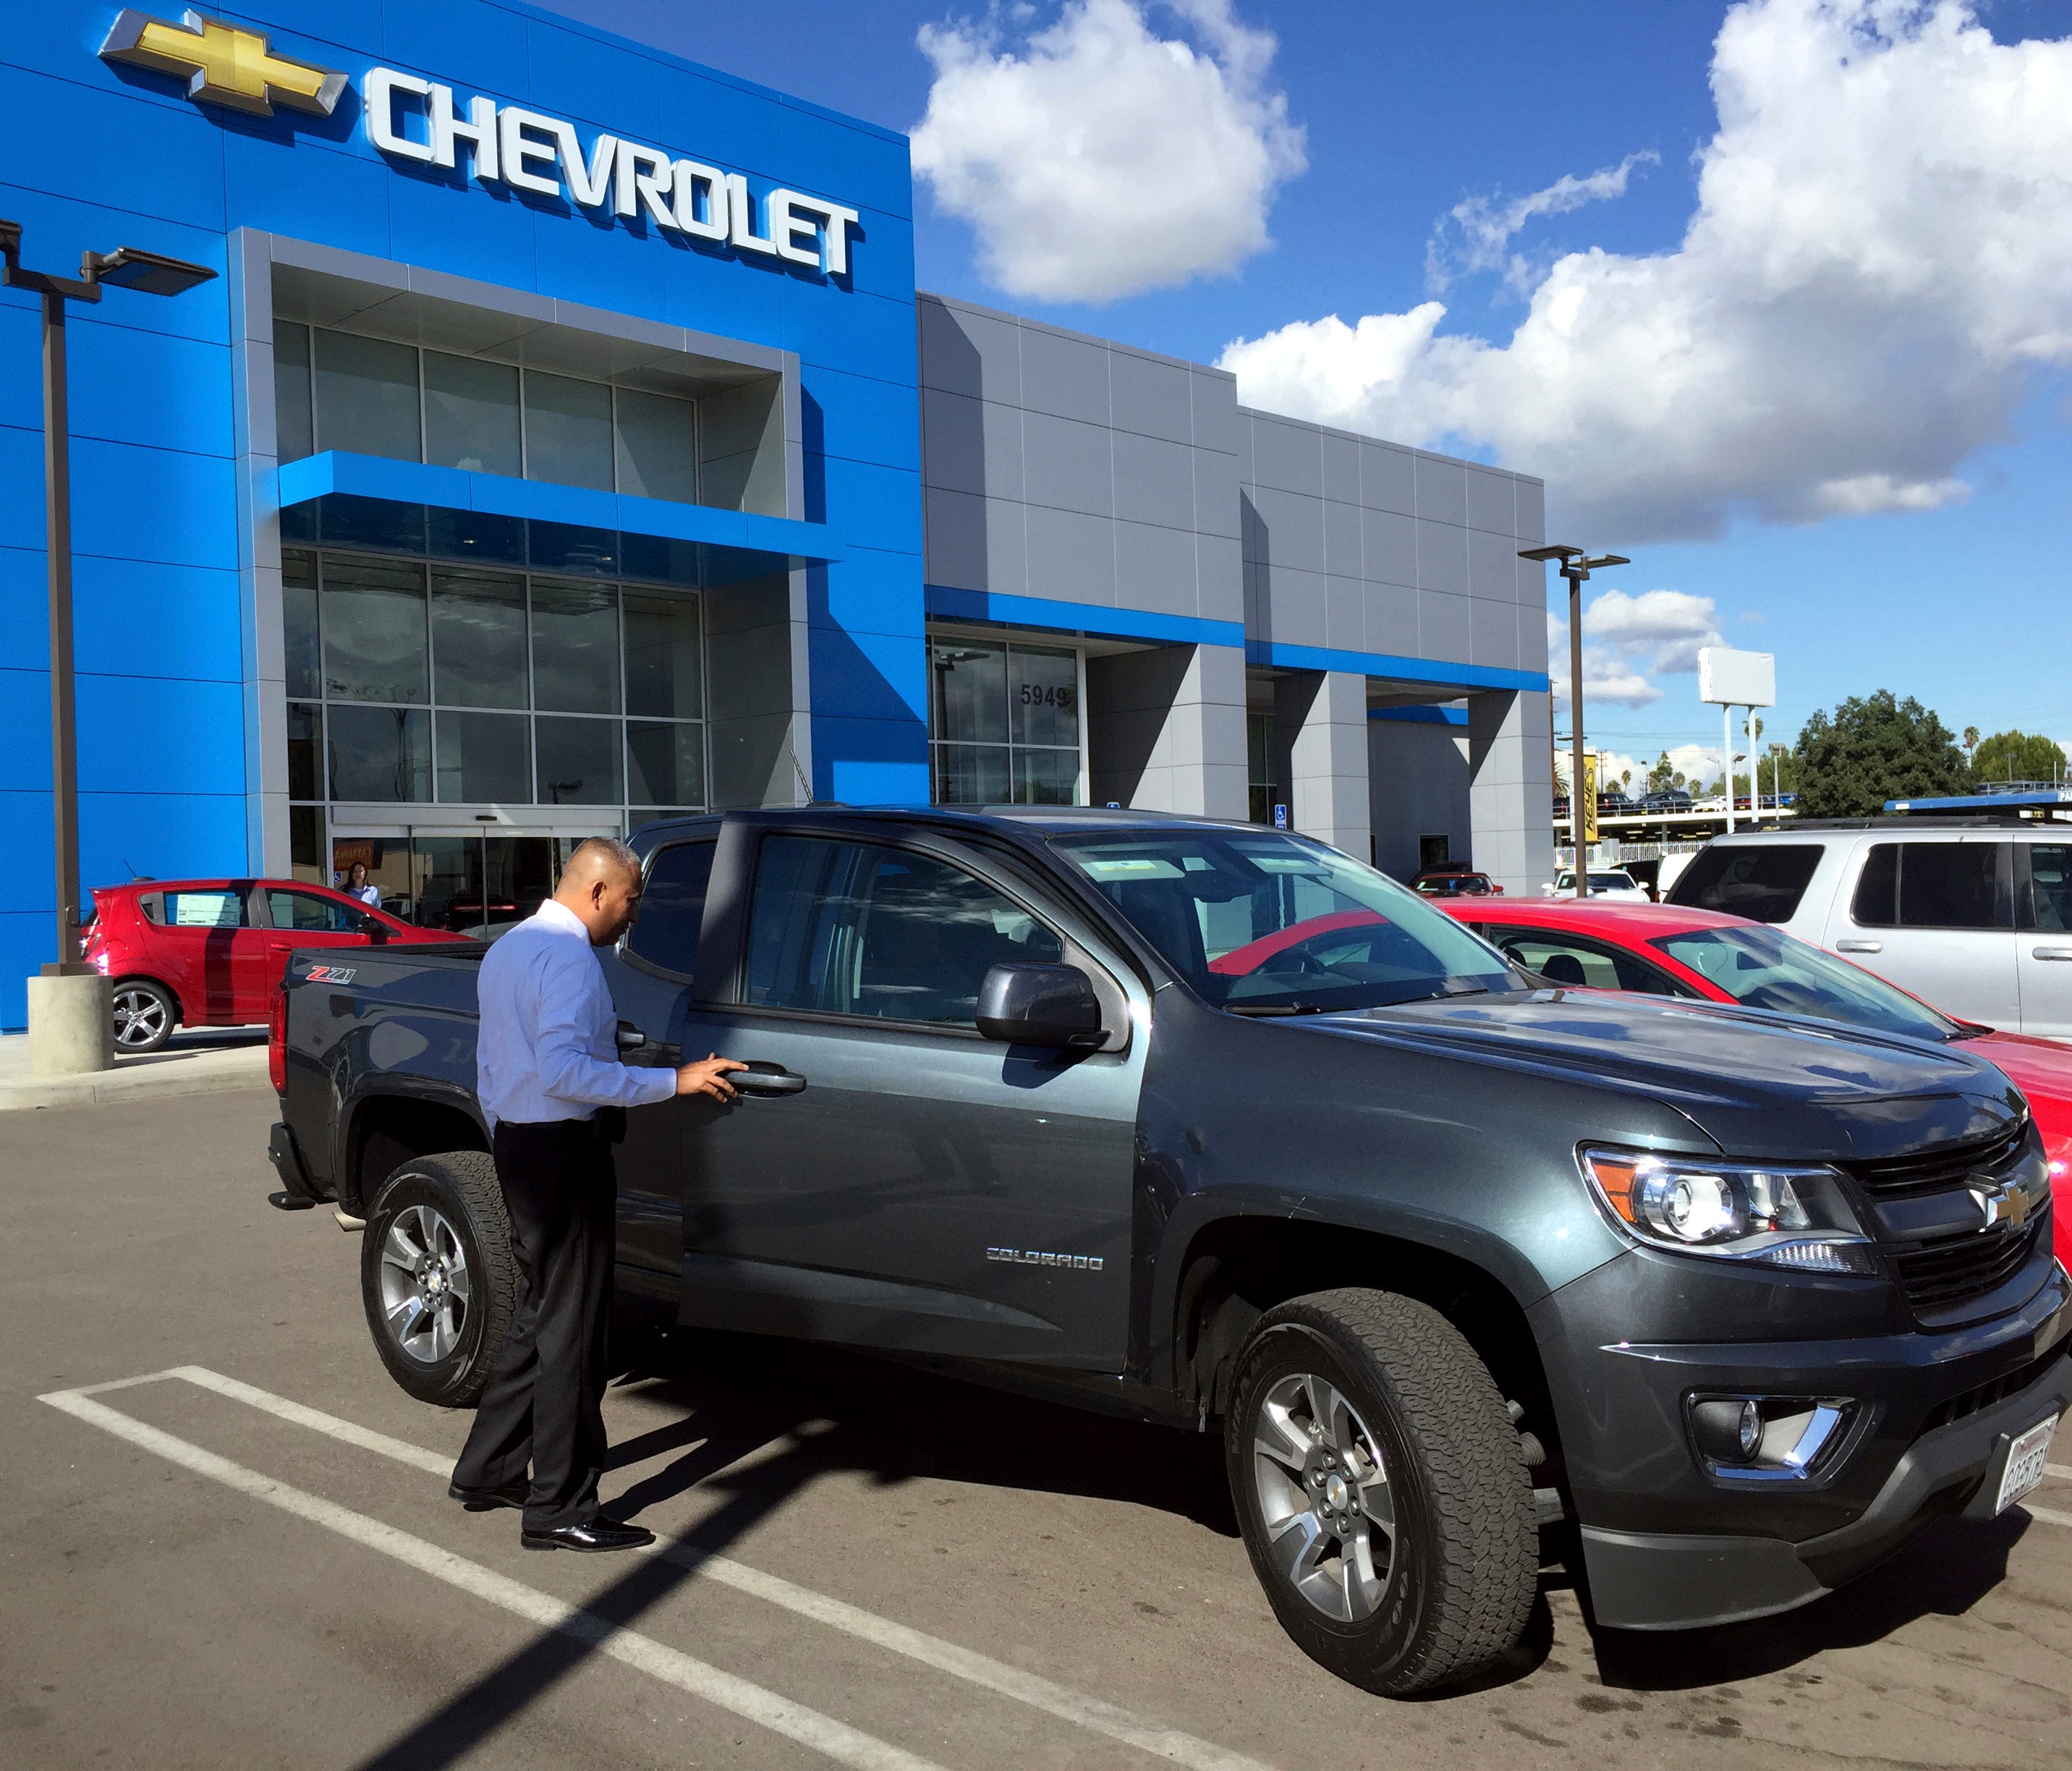 This November 2015 photo provided by Edmunds shows a 2015 Chevrolet Colorado being appraised at a Chevrolet dealership in the Van Nuys neighborhood of Los Angeles. Your first step in getting a clear-eyed estimate of your car's value is to appraise it